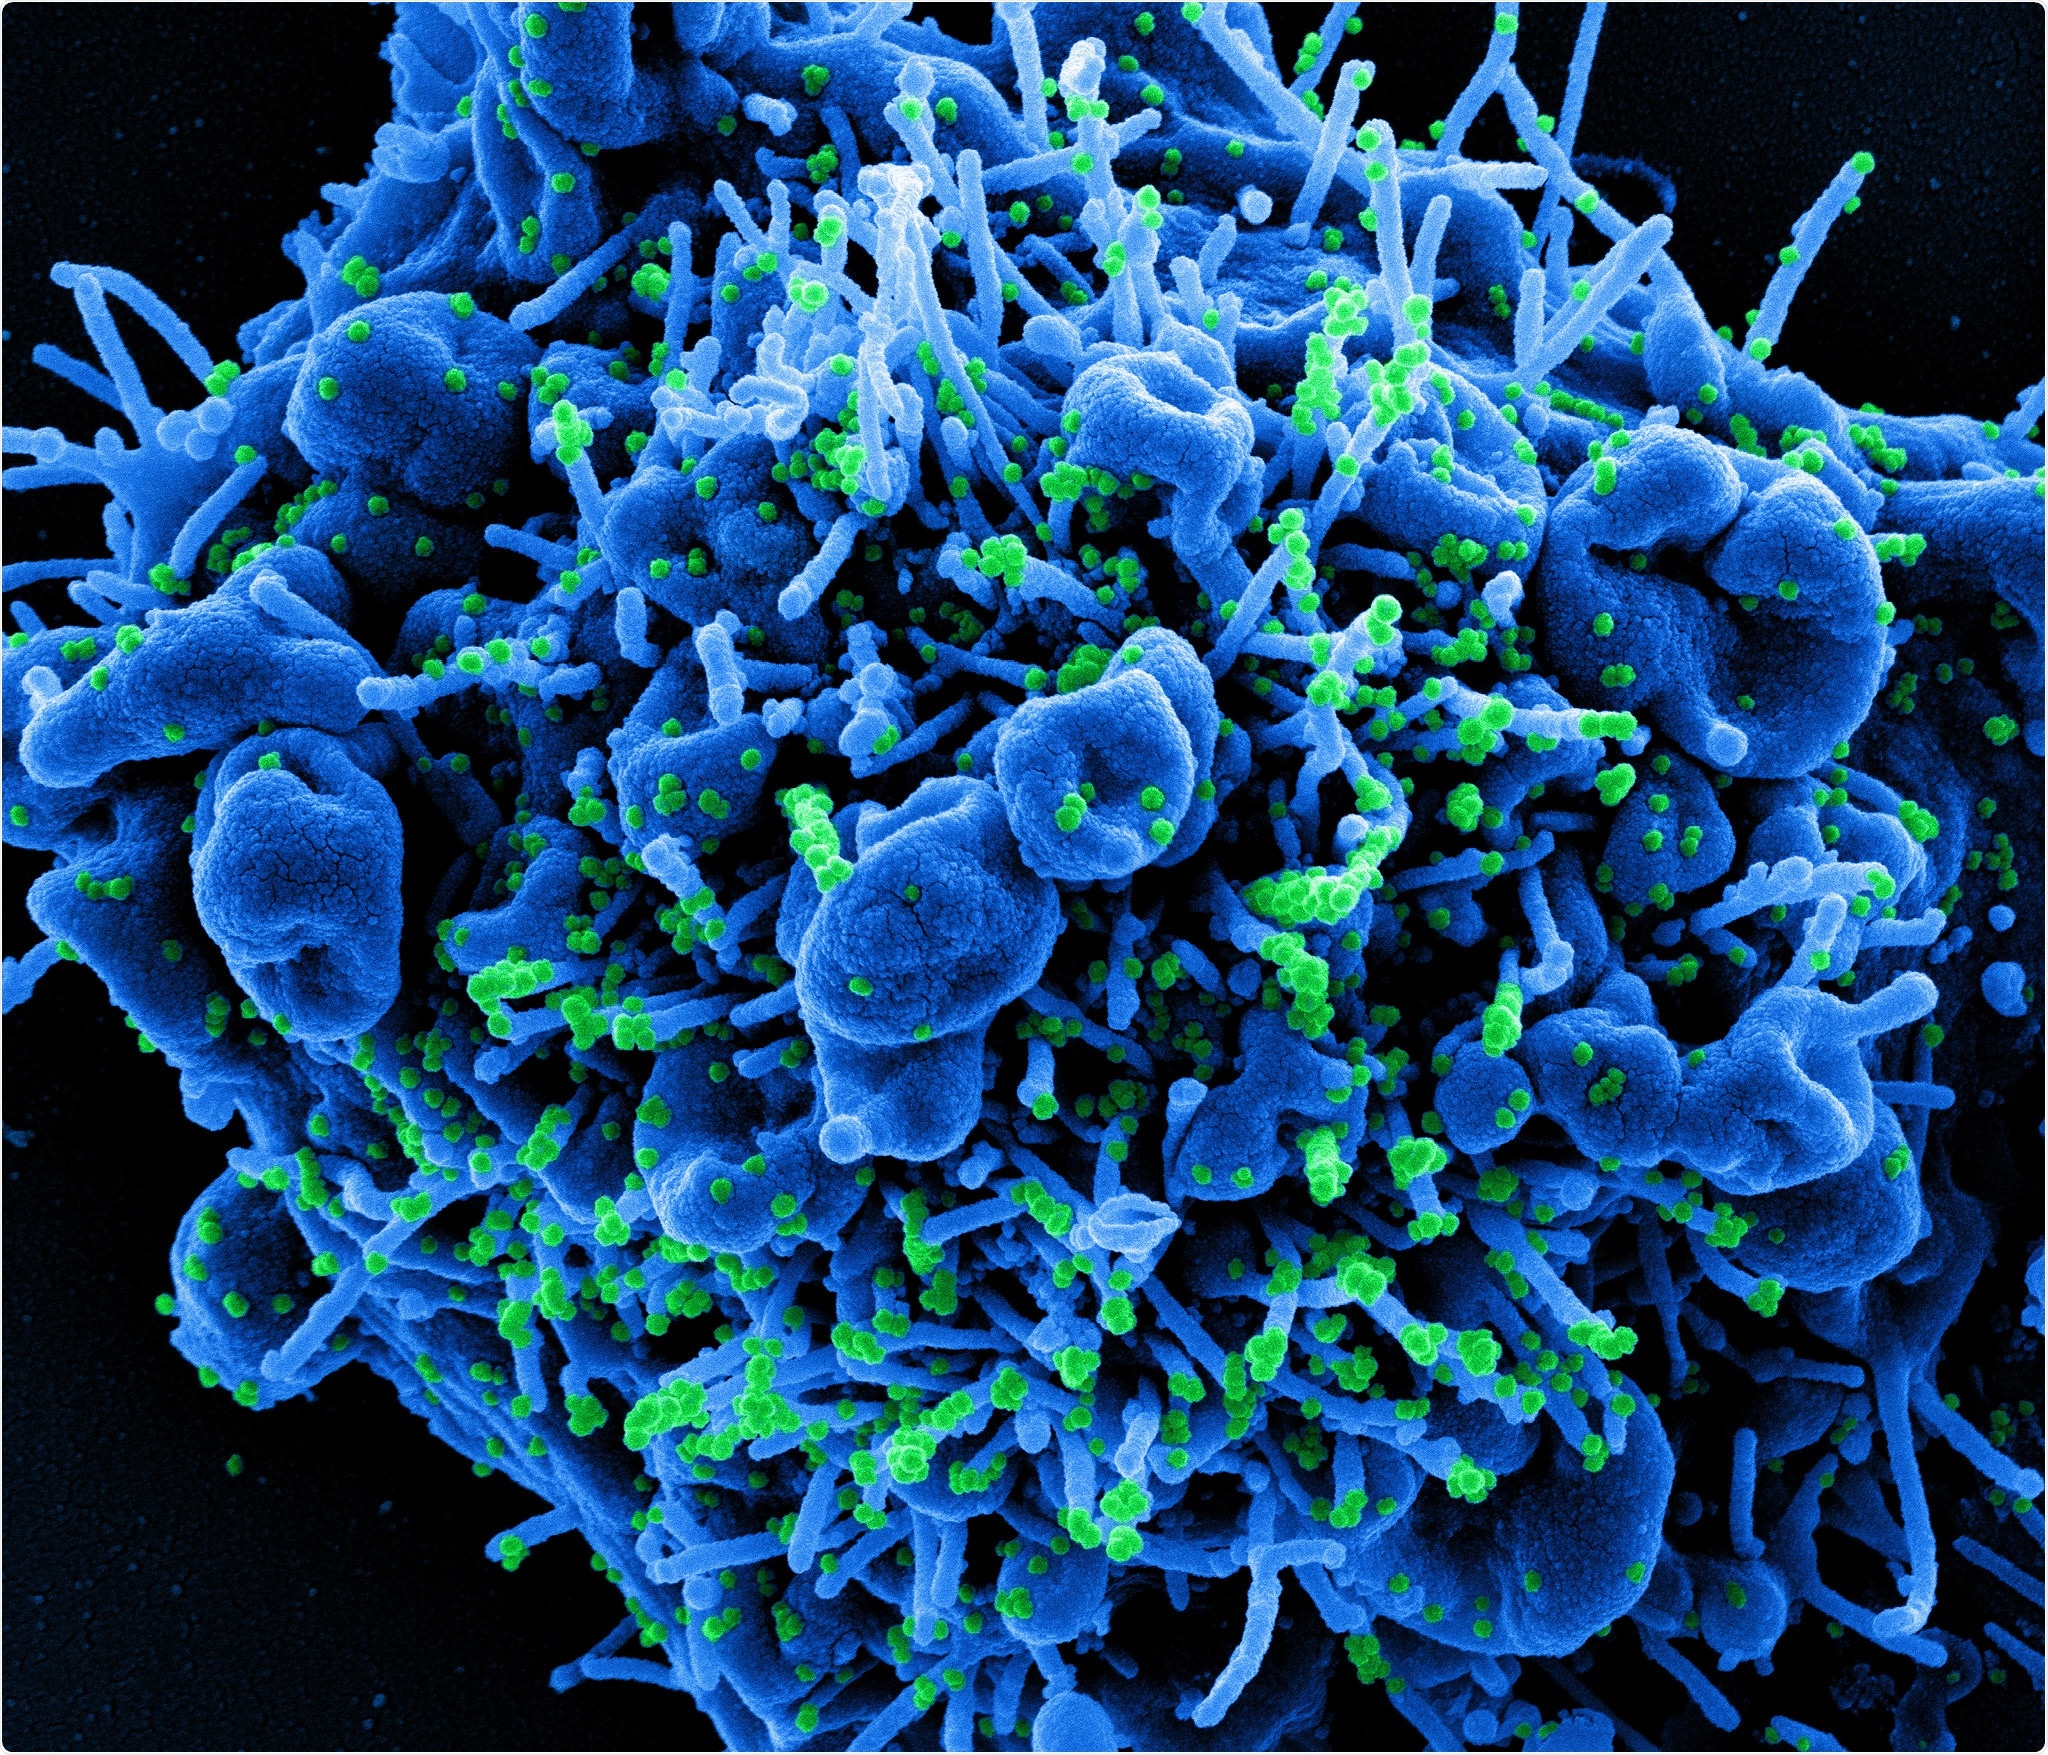 Colorized scanning electron micrograph of an apoptotic cell (blue) infected with SARS-COV-2 virus particles (green), isolated from a patient sample. Image captured at the NIAID Integrated Research Facility (IRF) in Fort Detrick, Maryland. Credit: NIAID